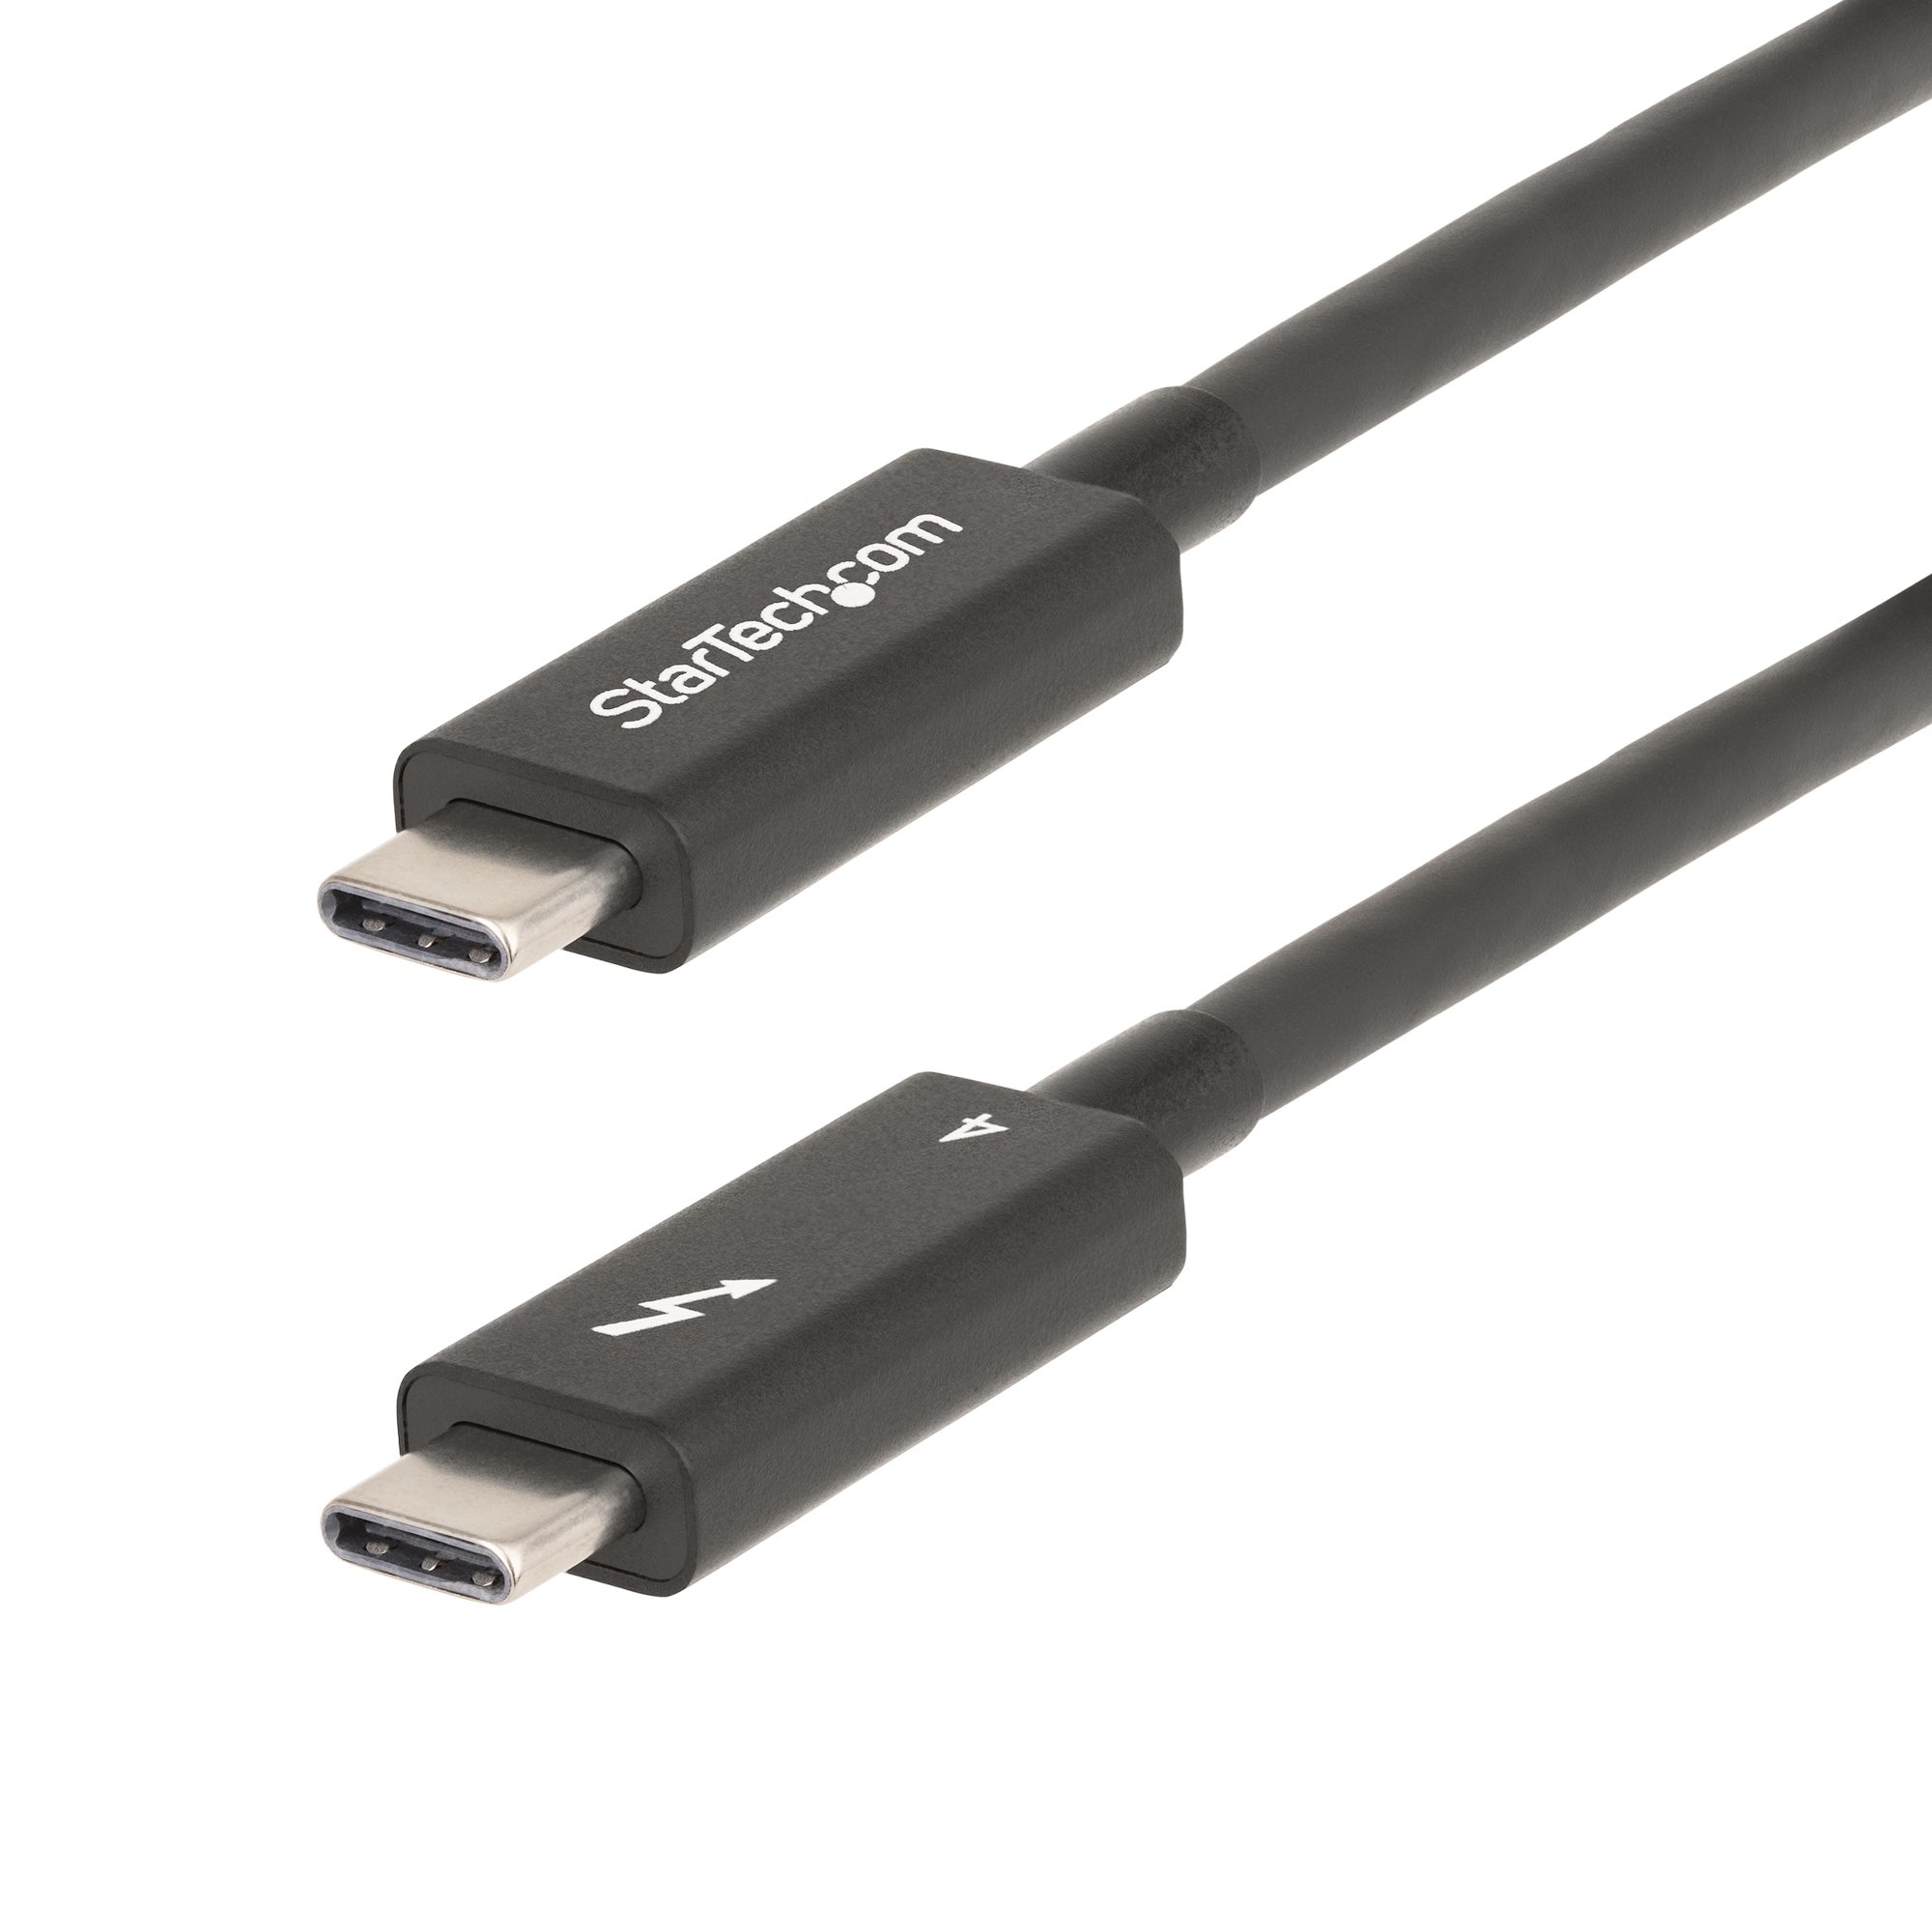 【A40G2MB-TB4-CABLE】6FT (2M) ACTIVE THUNDERBOLT 4 CA